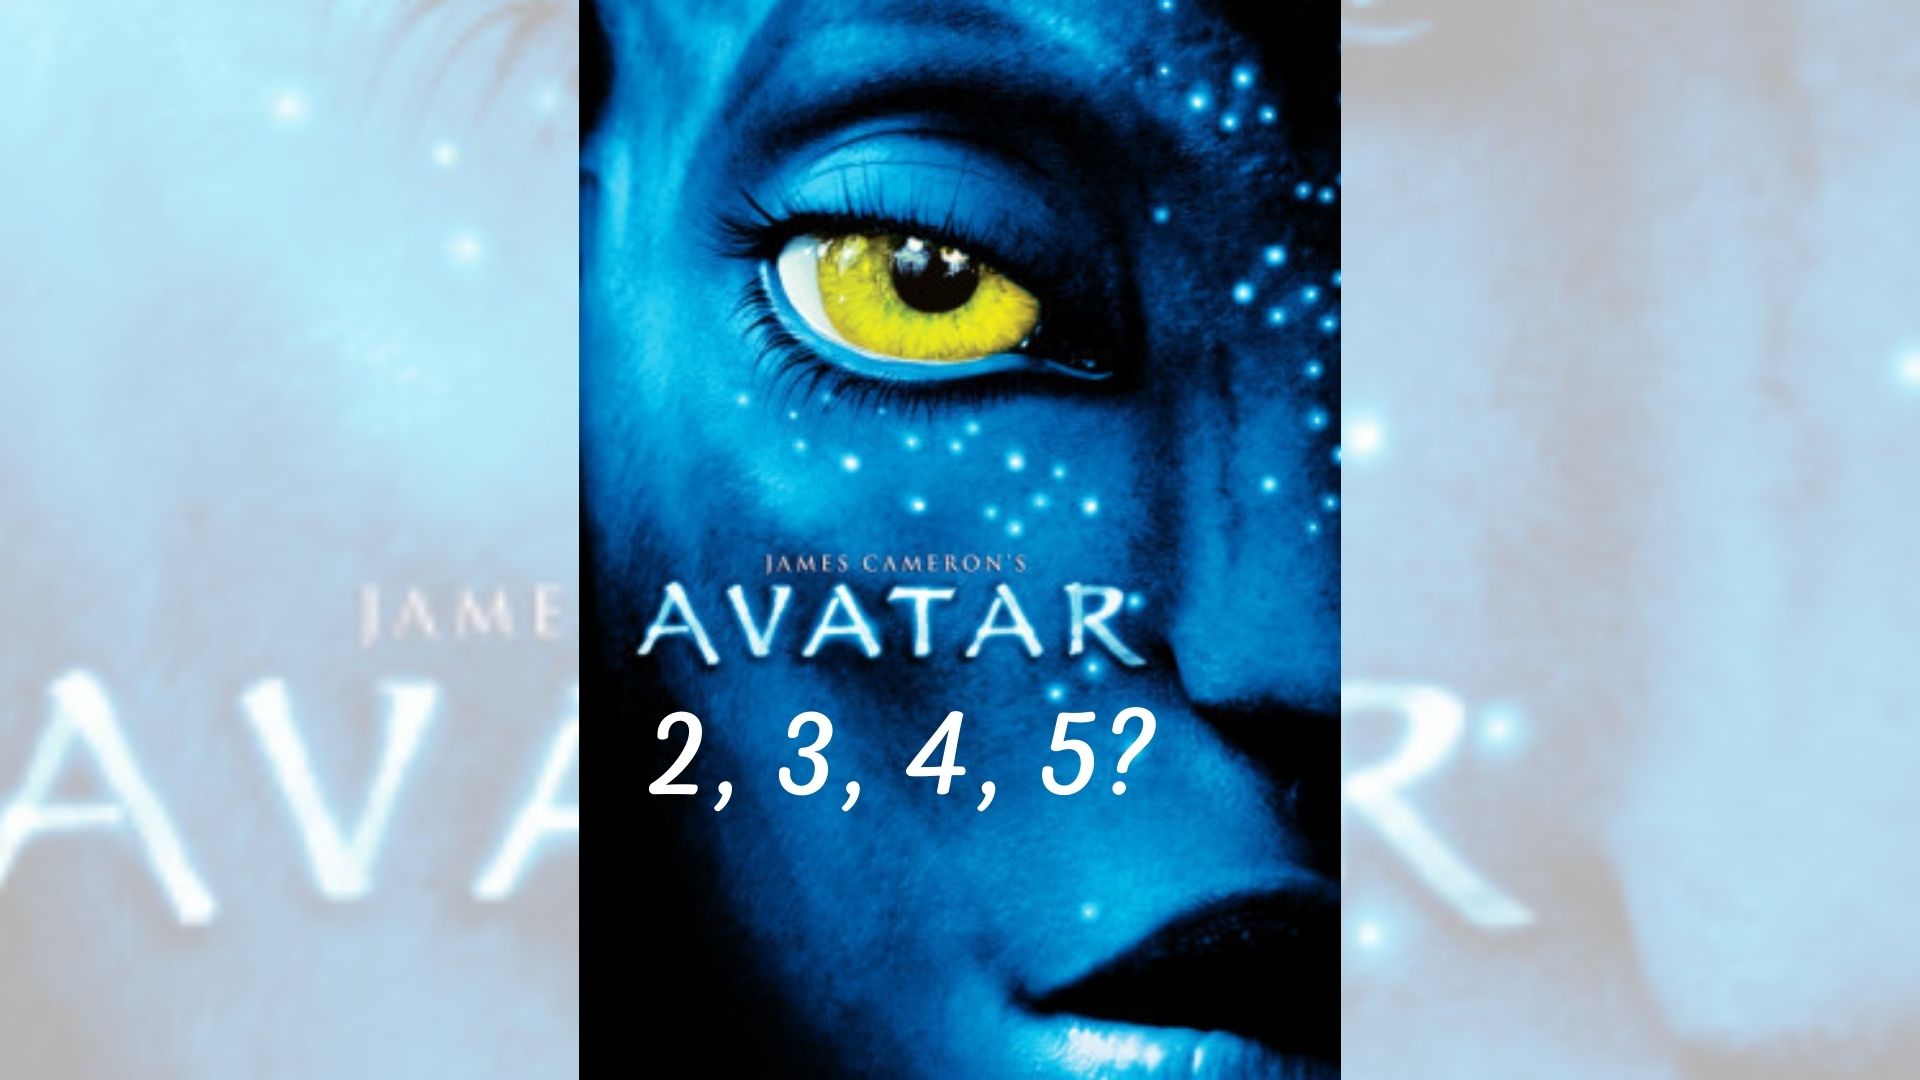 Avatar 2: All new updates and release dates and reason for delays